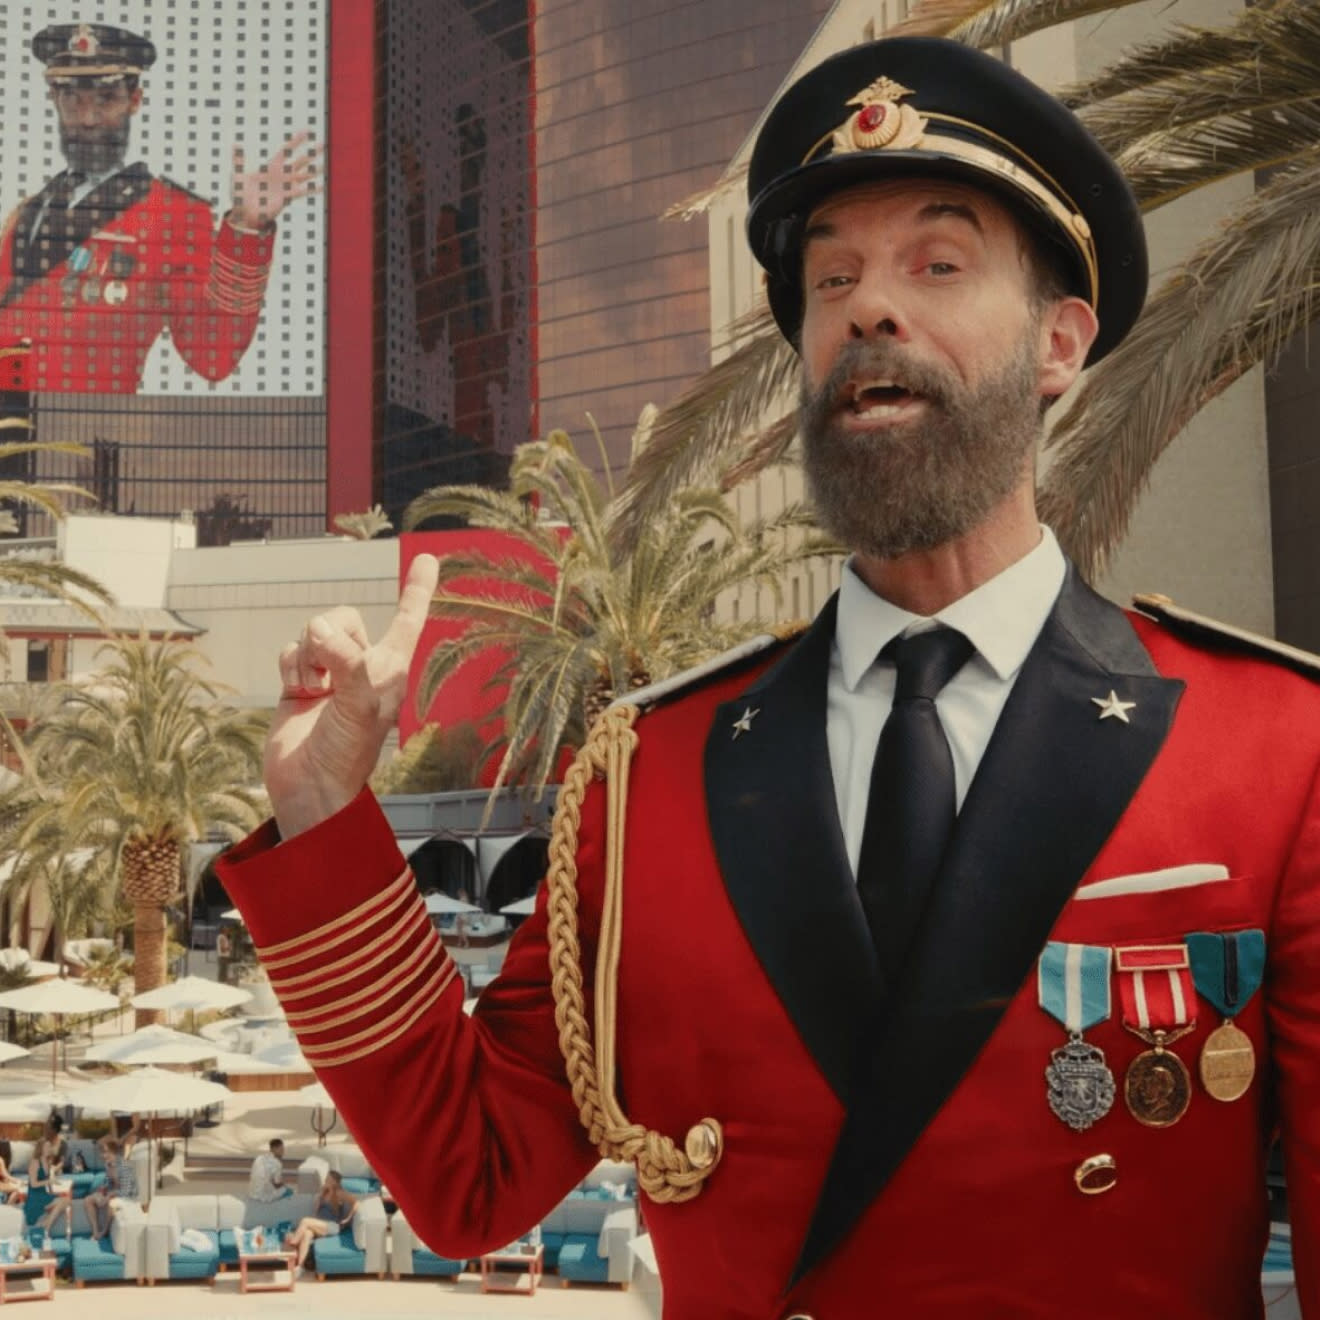 Hotels.com promo of Captain Obvious